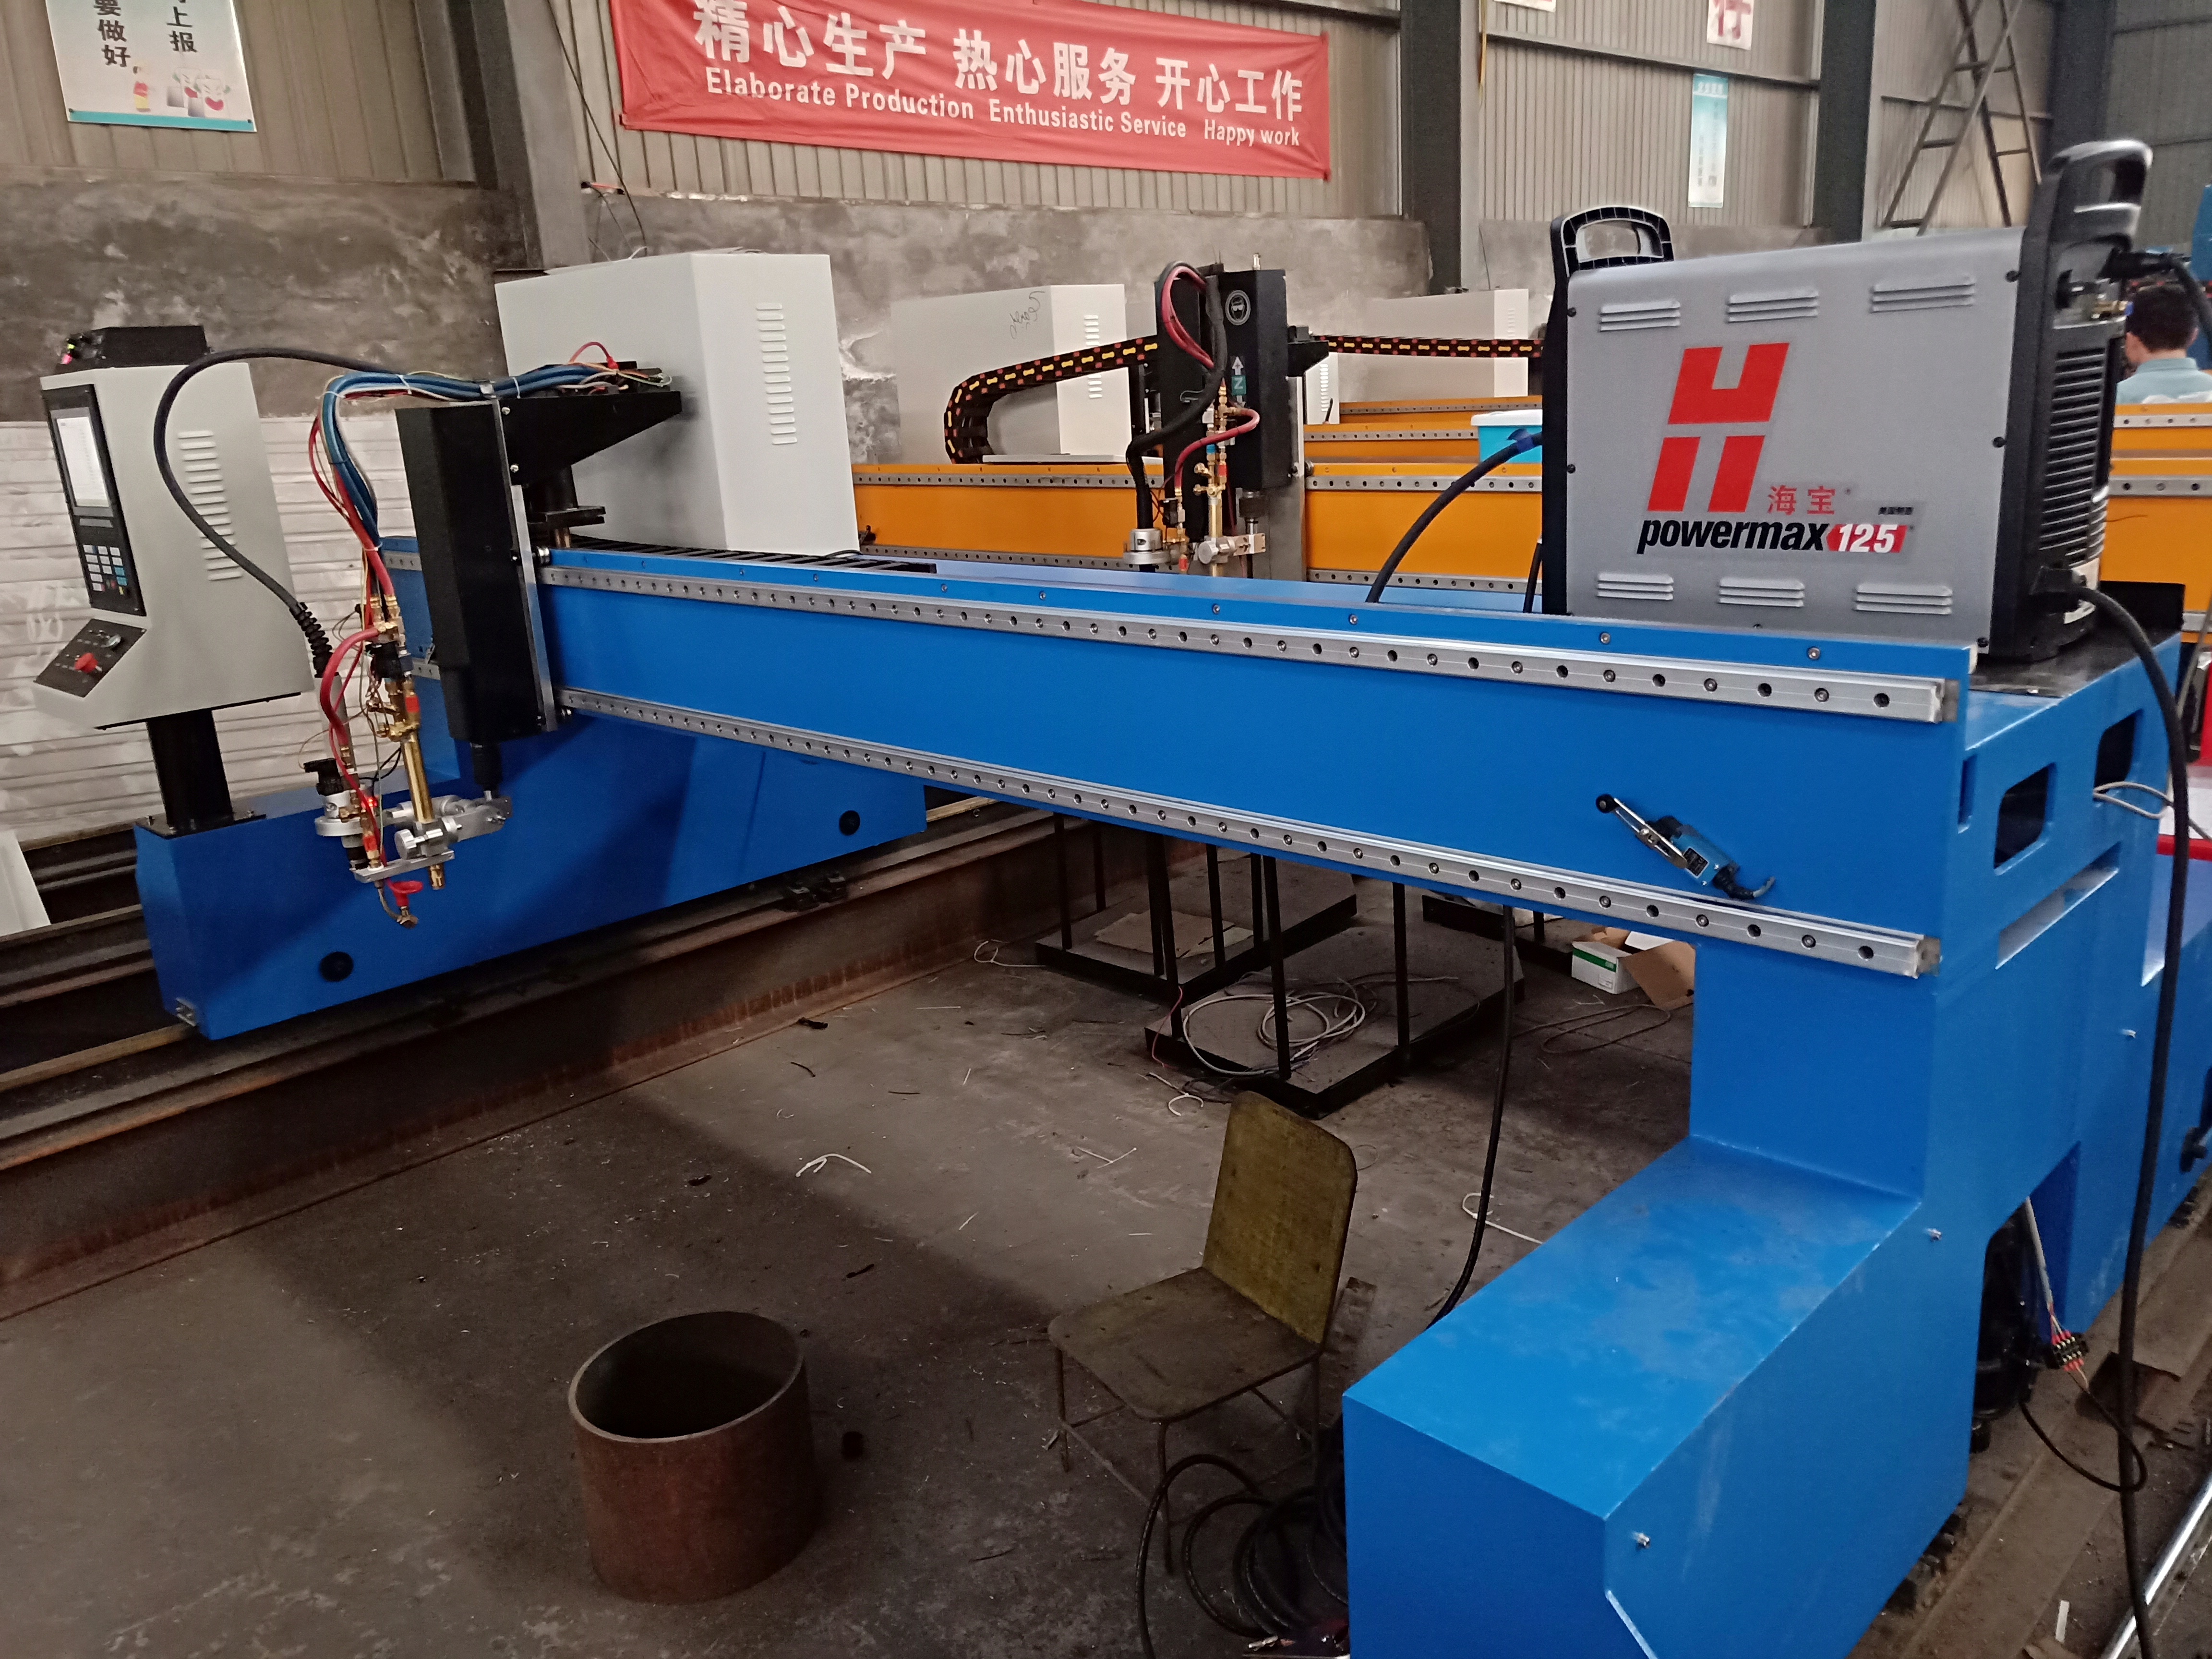 Buying CNC plasma cutting machine should take into account quality and price